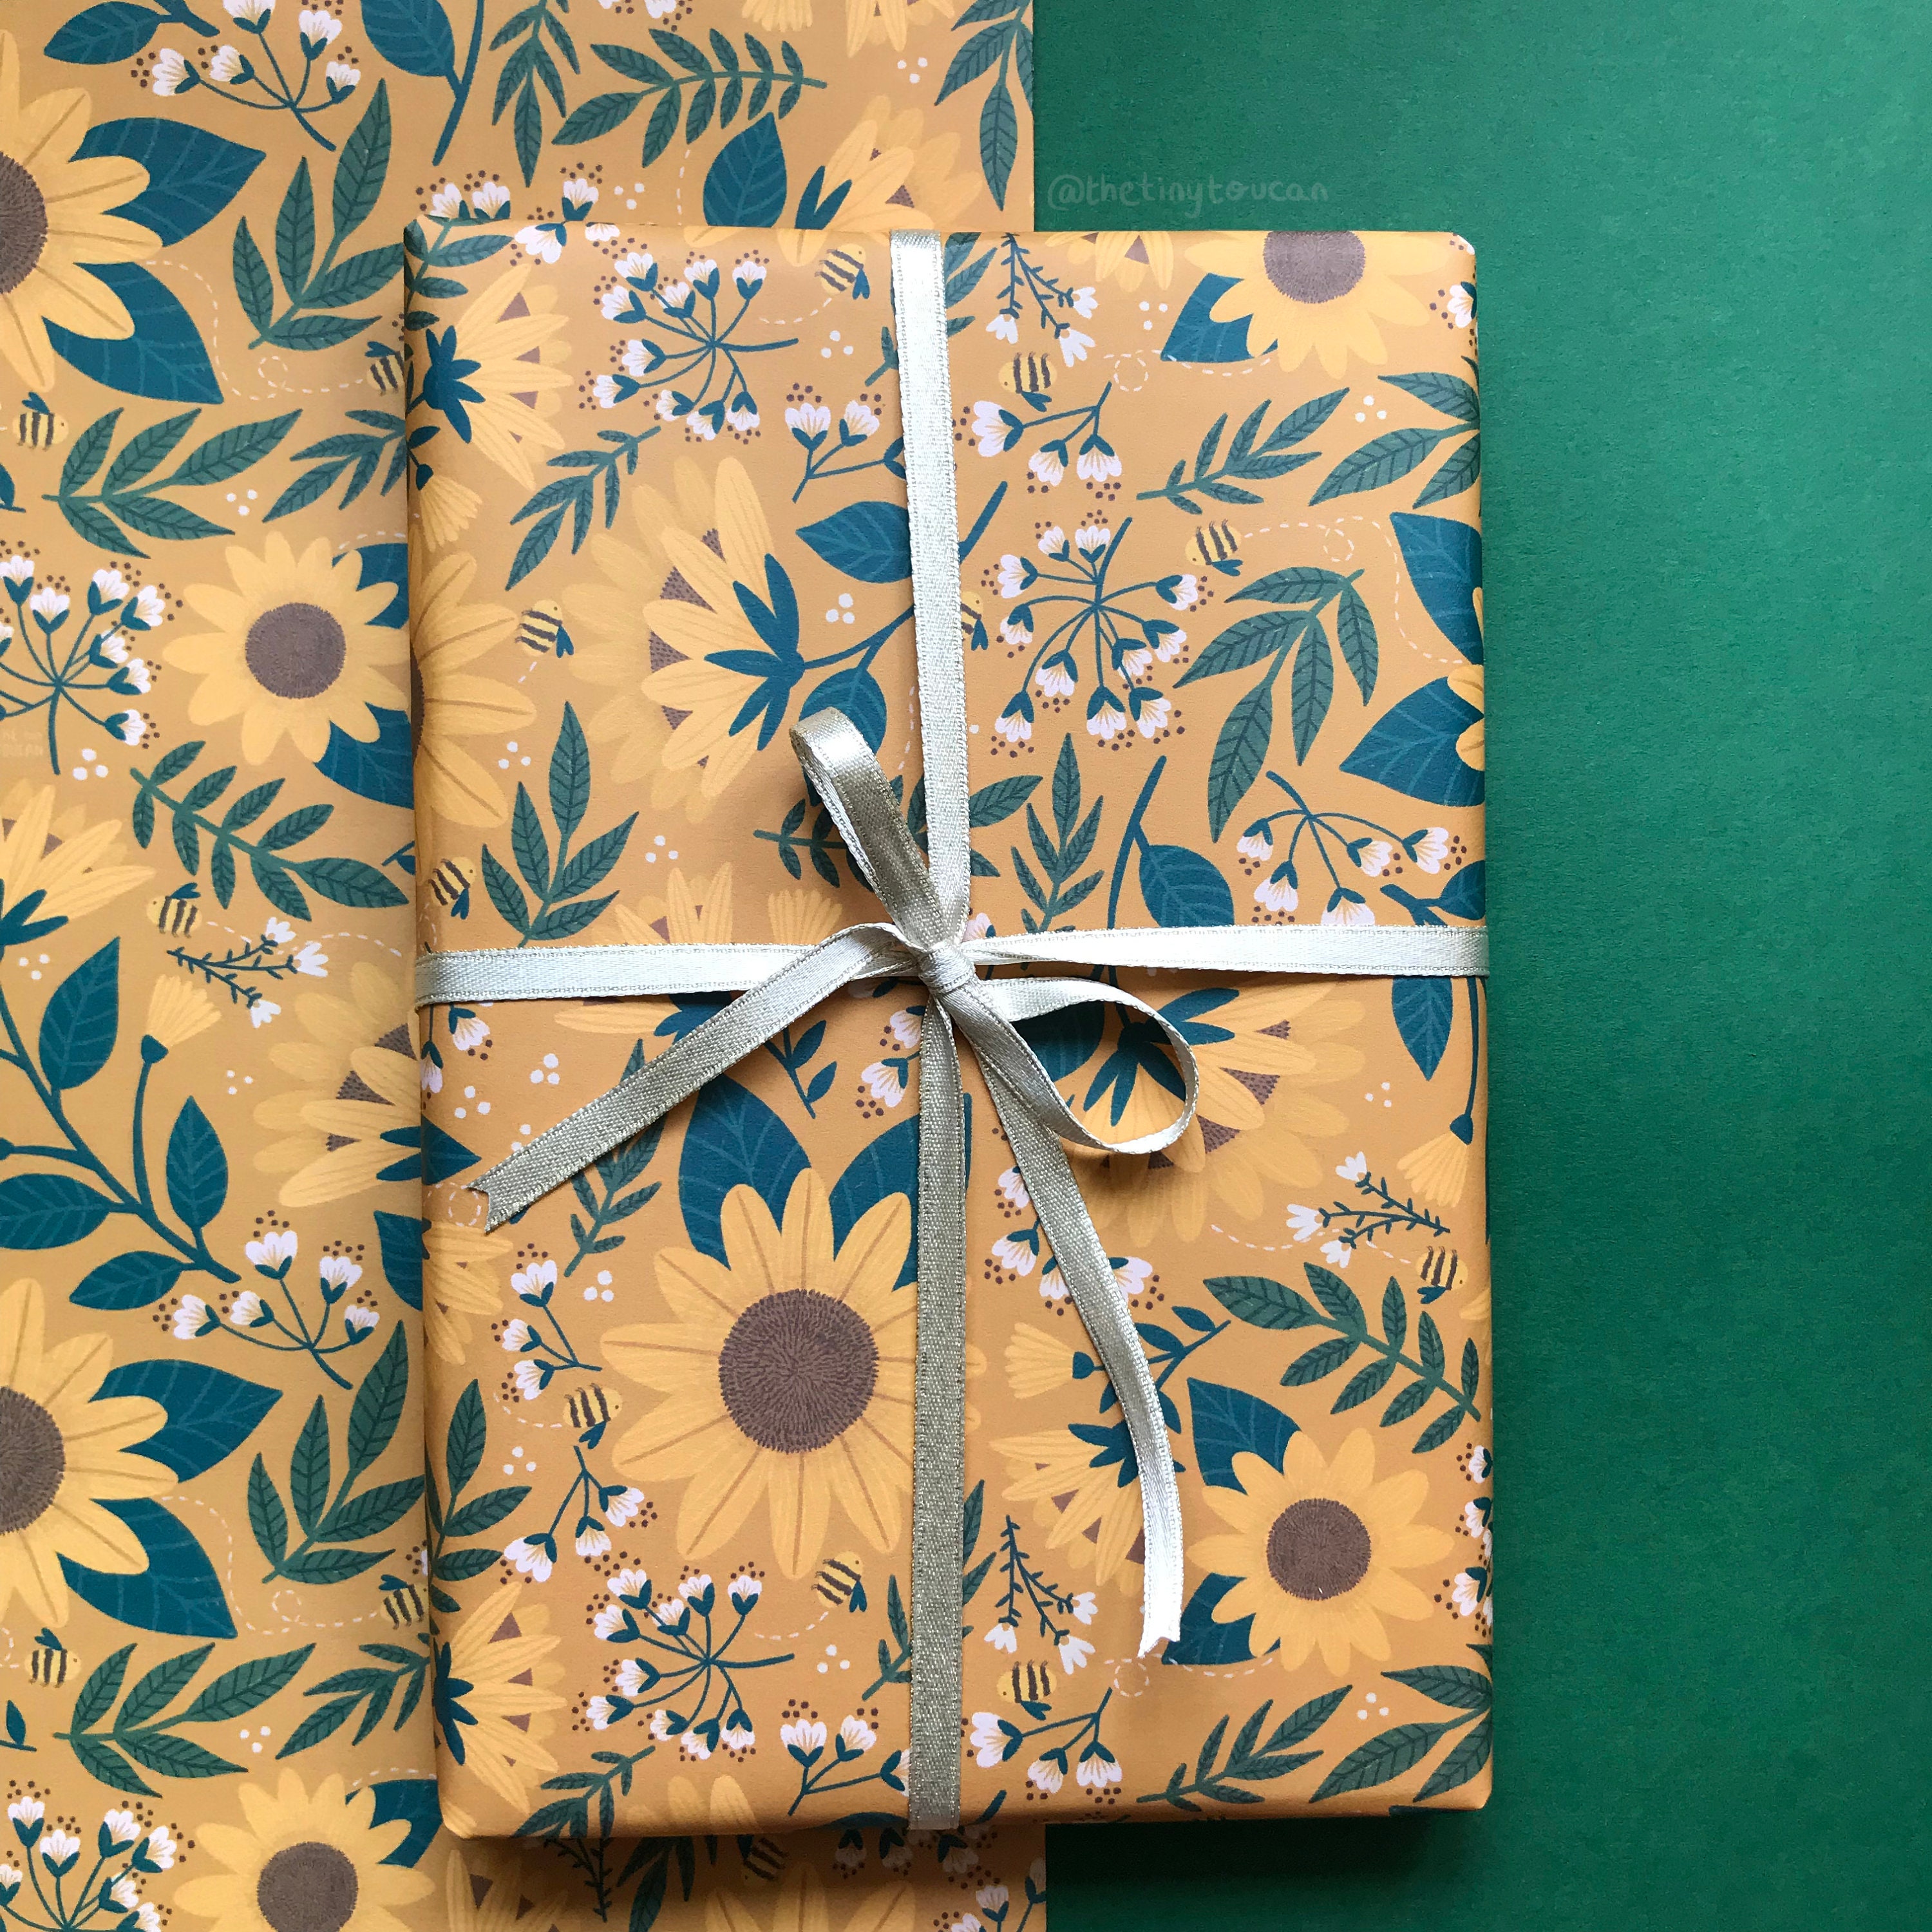 Christmas Flowers Wrapping Paper Red Orange Teal Green Floral Gift Wrapping  Paper Christmas Non Traditional Luxury Sunflower Gift Wrap Paper 